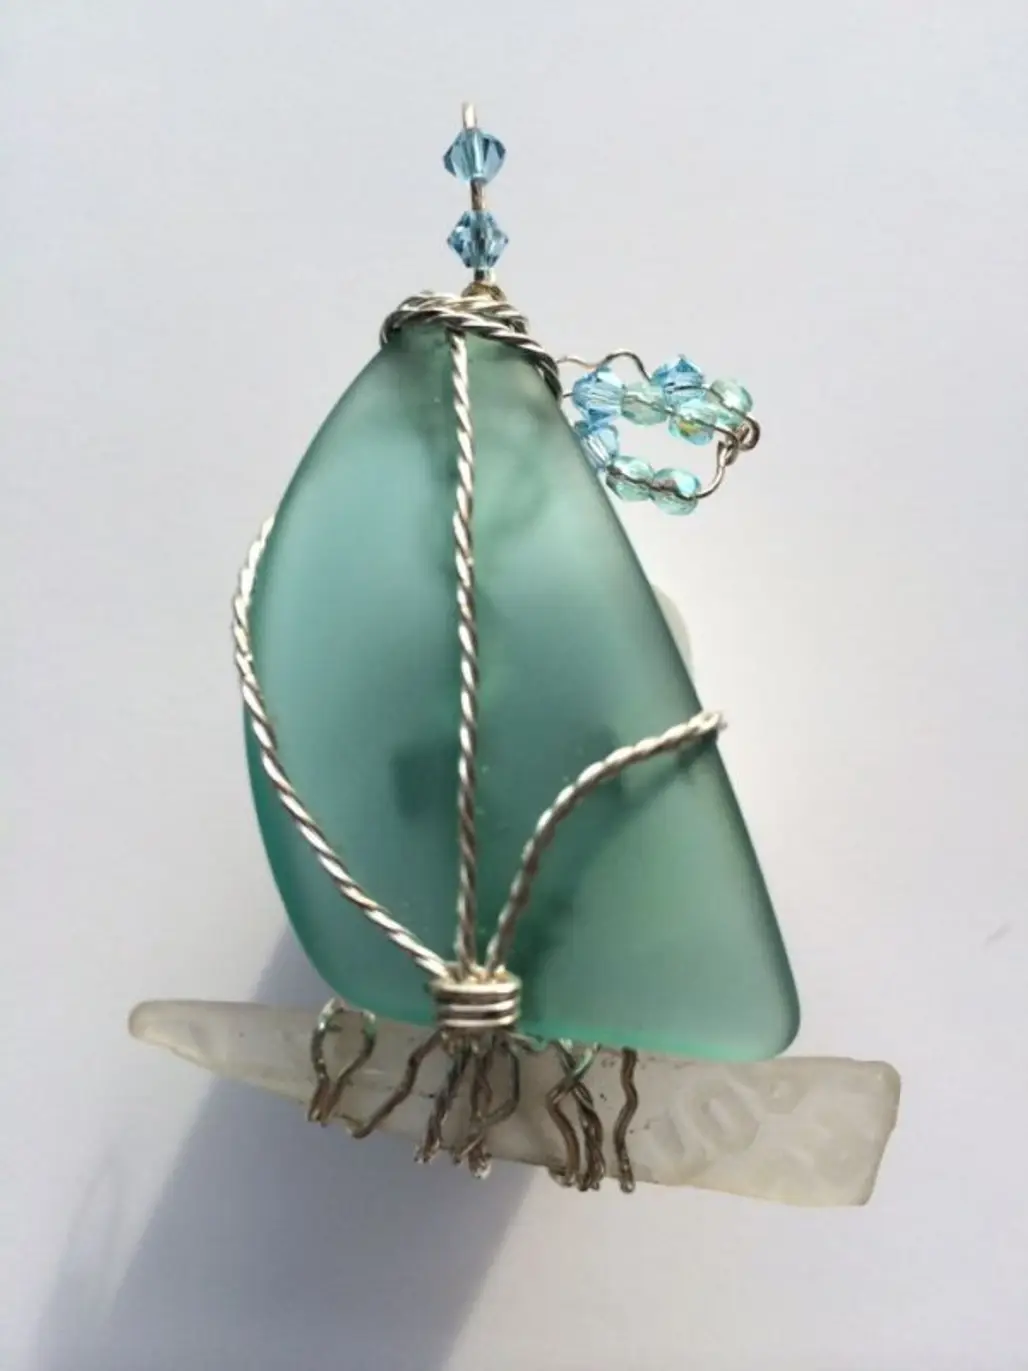 A Sea Glass Sailboat is Perfect